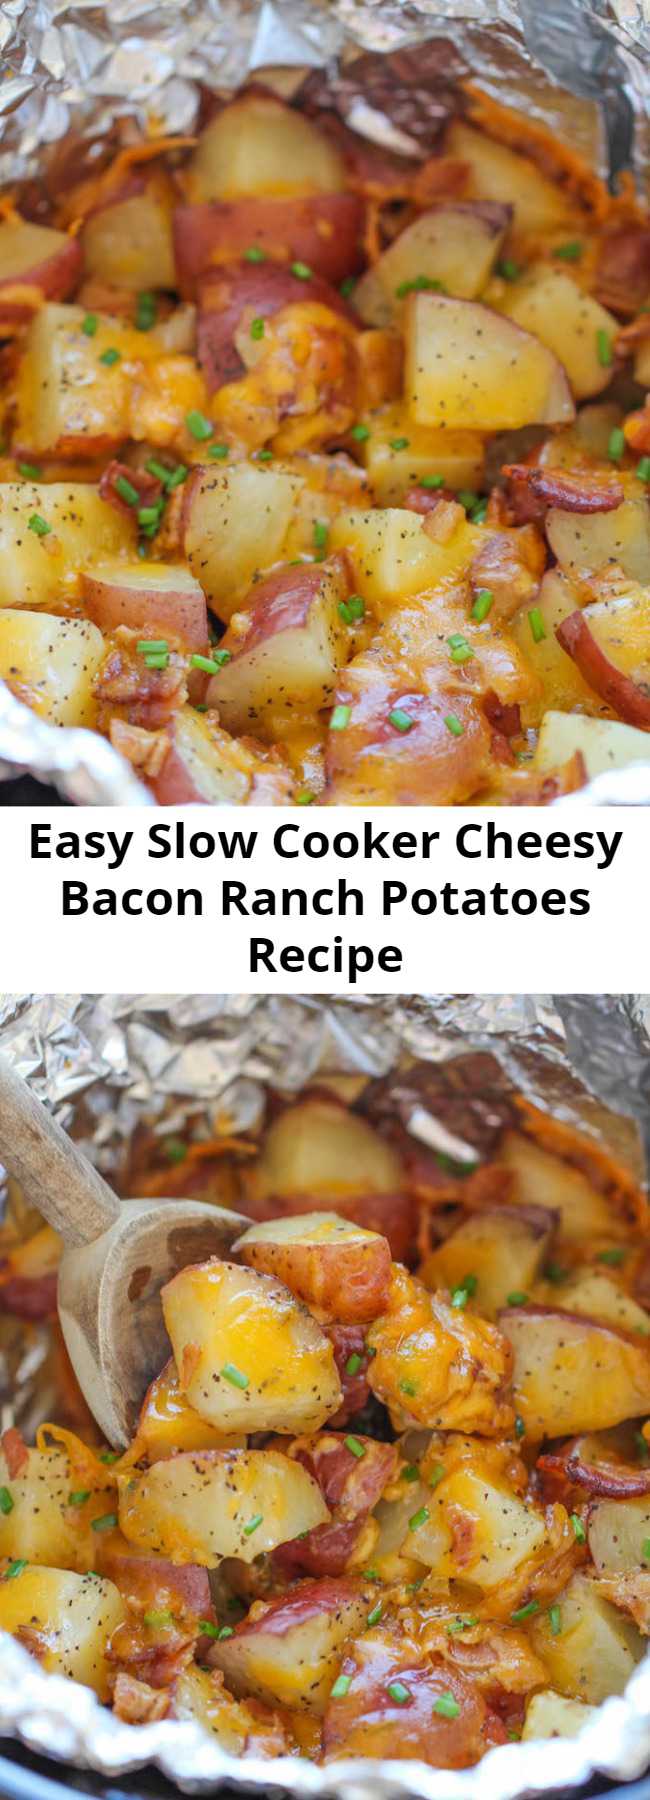 Easy Slow Cooker Cheesy Bacon Ranch Potatoes Recipe - The easiest potatoes you can make right in the crockpot – perfectly tender, flavorful and cheesy!